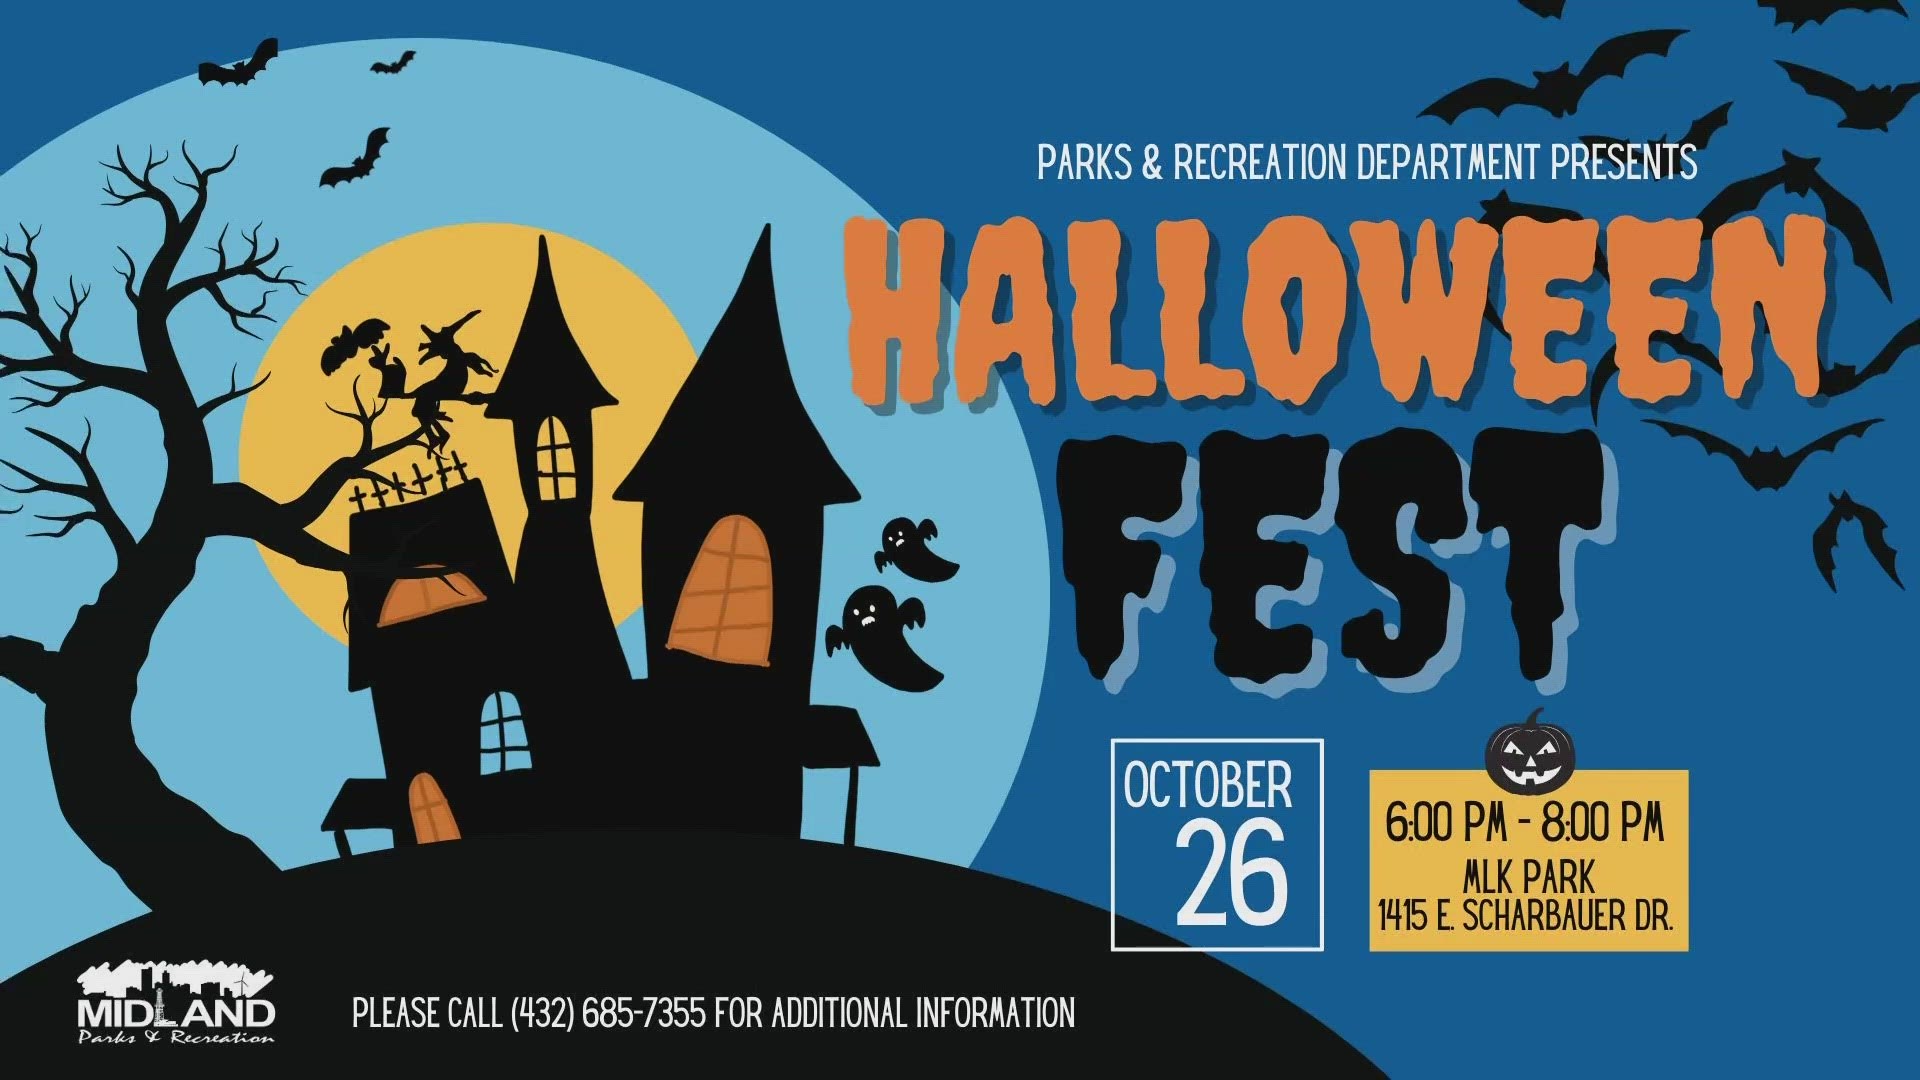 City of Midland Parks and Recreation is hosting the 11th annual Halloweenfest at the MLK Jr. Community Center on Thursday at 6 p.m. to 8 p.m.